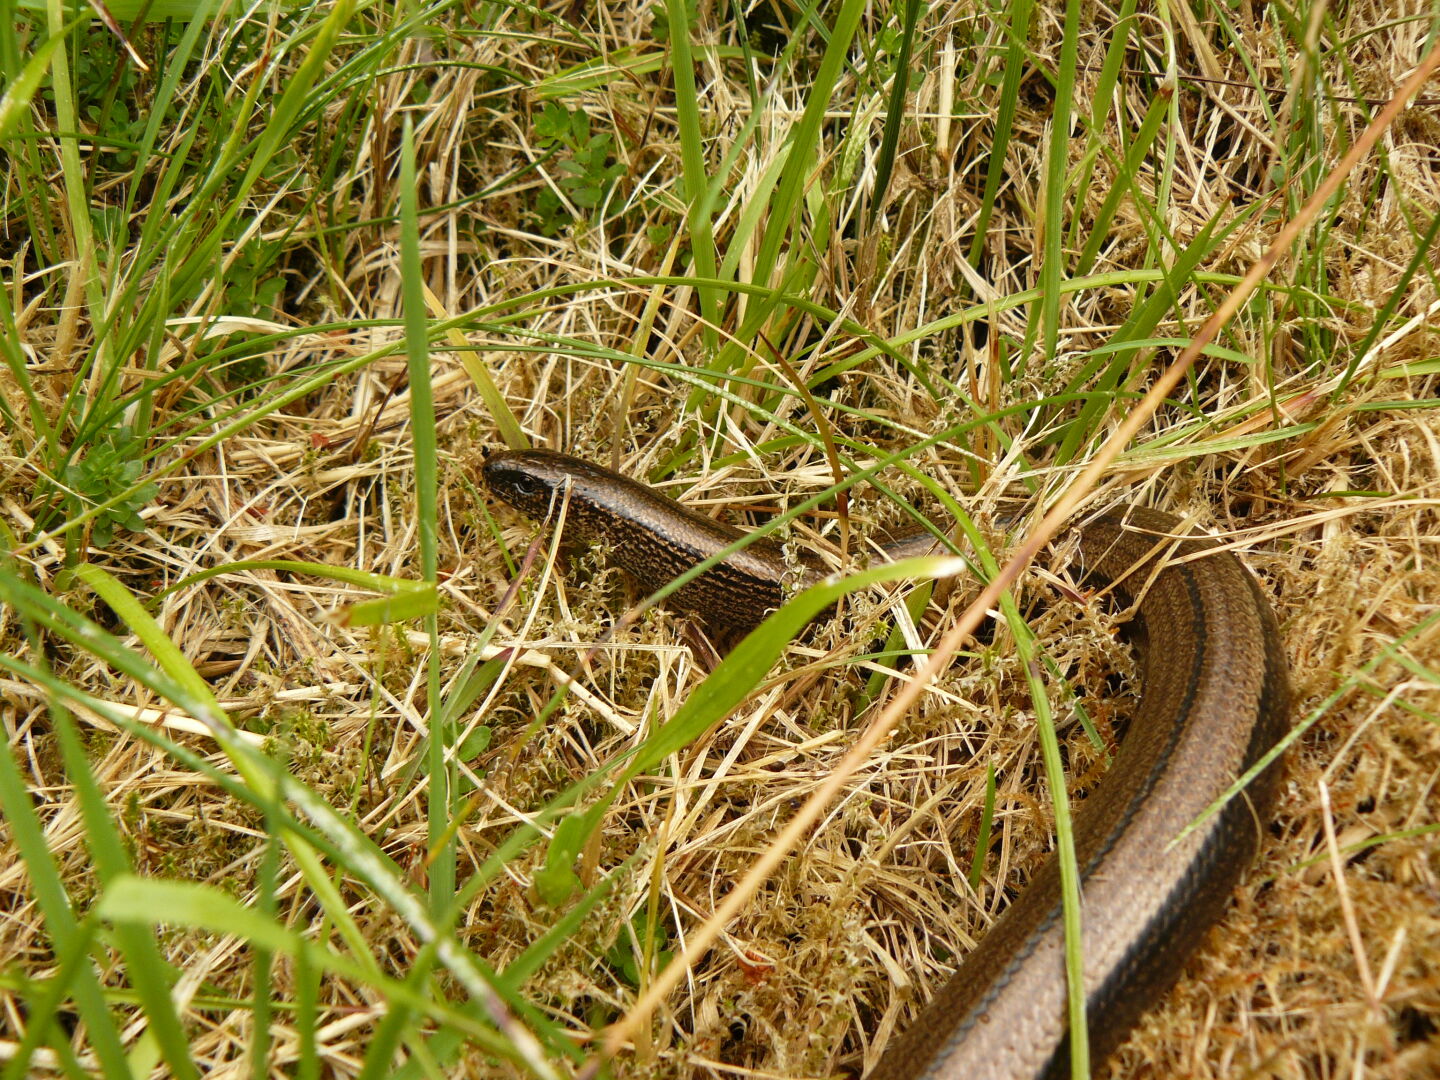 A female blindworm, too stuffed with food to escape quickly.